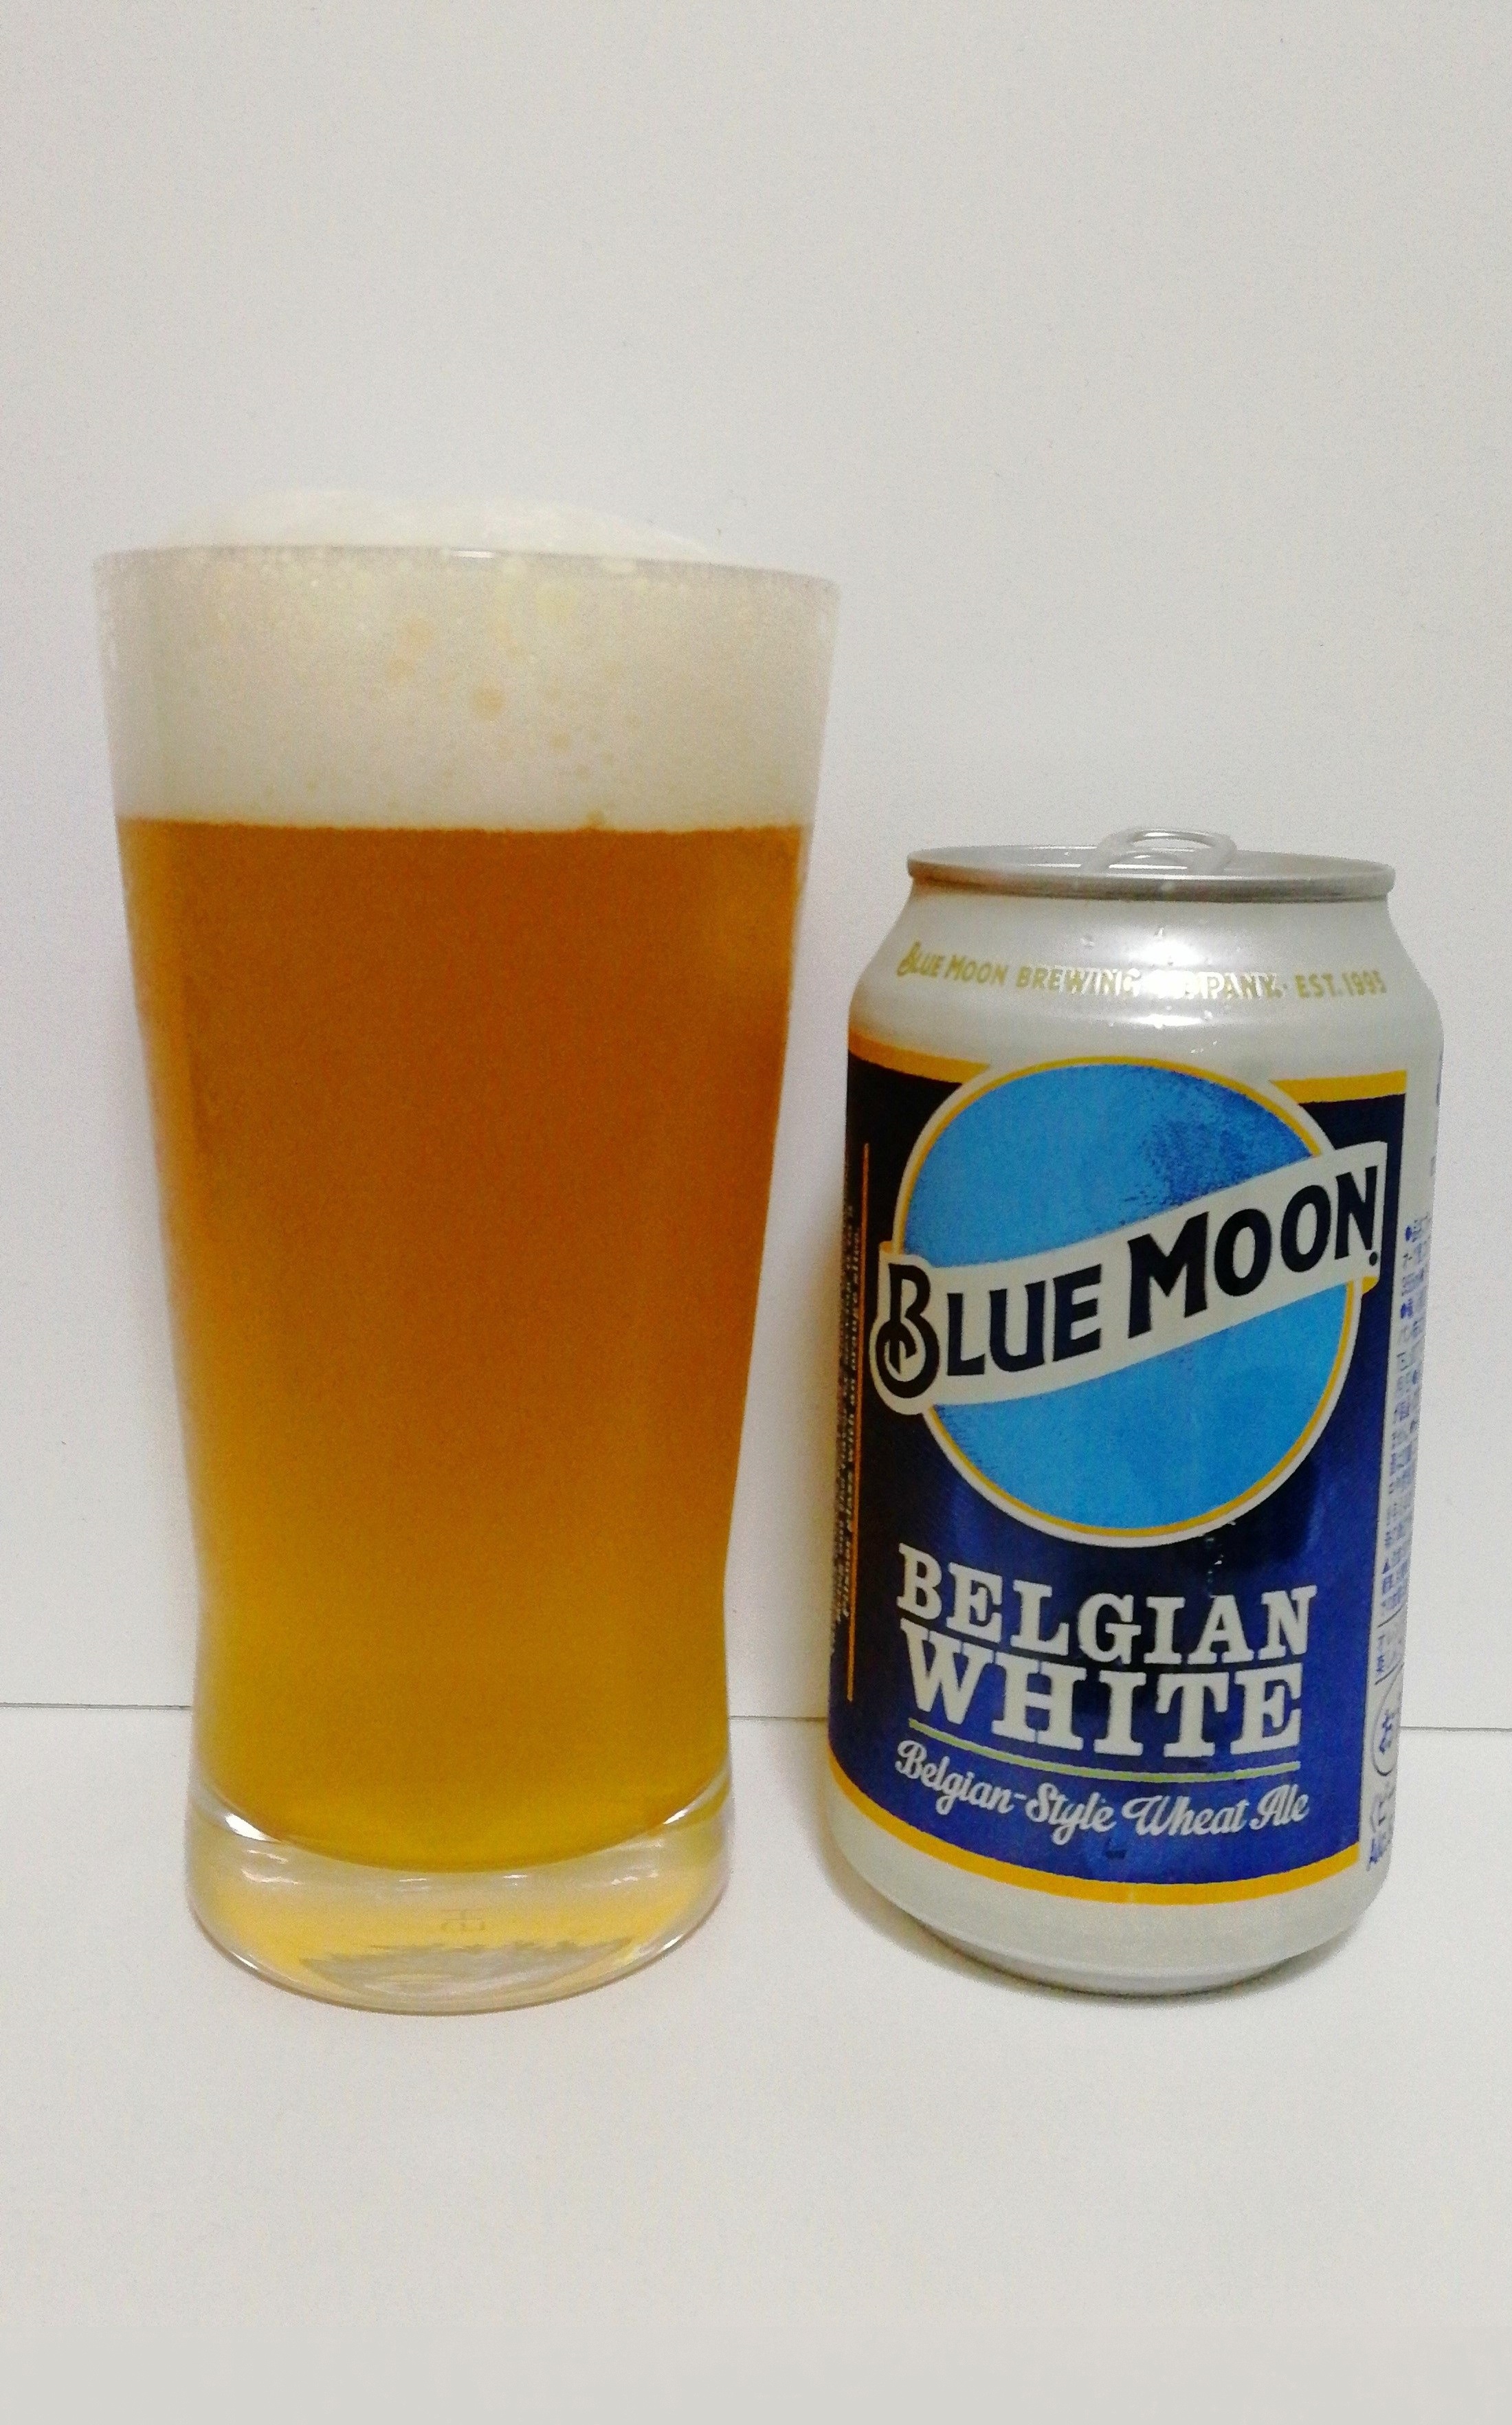 BLUEMOONBREWING Belgian-Style Wheat Ale